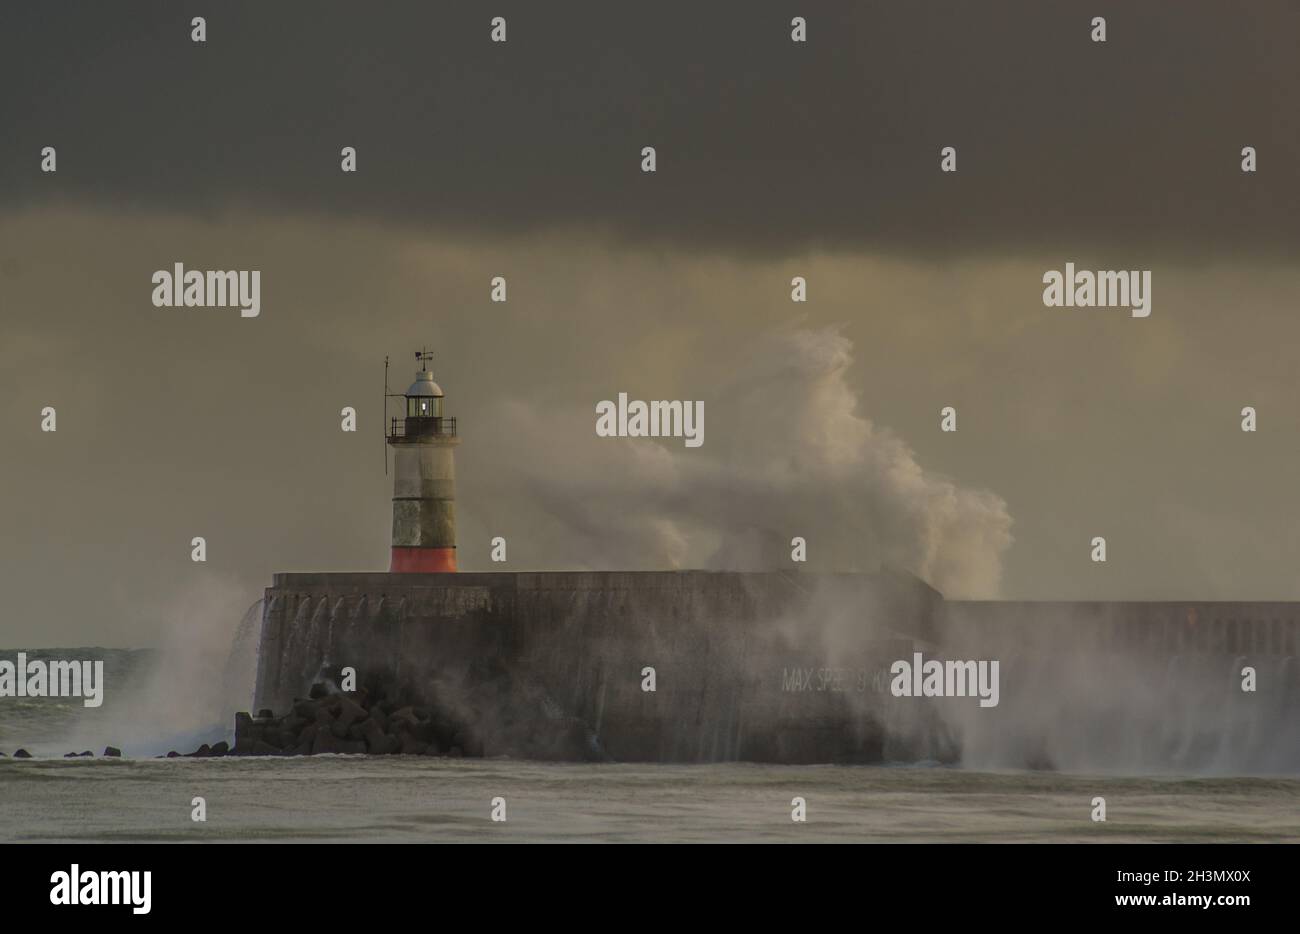 Newhaven, East Sussex, UK. 29th Oct, 2021. A strong South Westerly wind whips up the waves along the South coast creating some spectacular scenes particularly when the sunlight breaks through the heavy cloud cover. Still warm at 15 degrees temperatures are forecast to fall in the next week with more heavy rain. Credit: David Burr/Alamy Live News Stock Photo